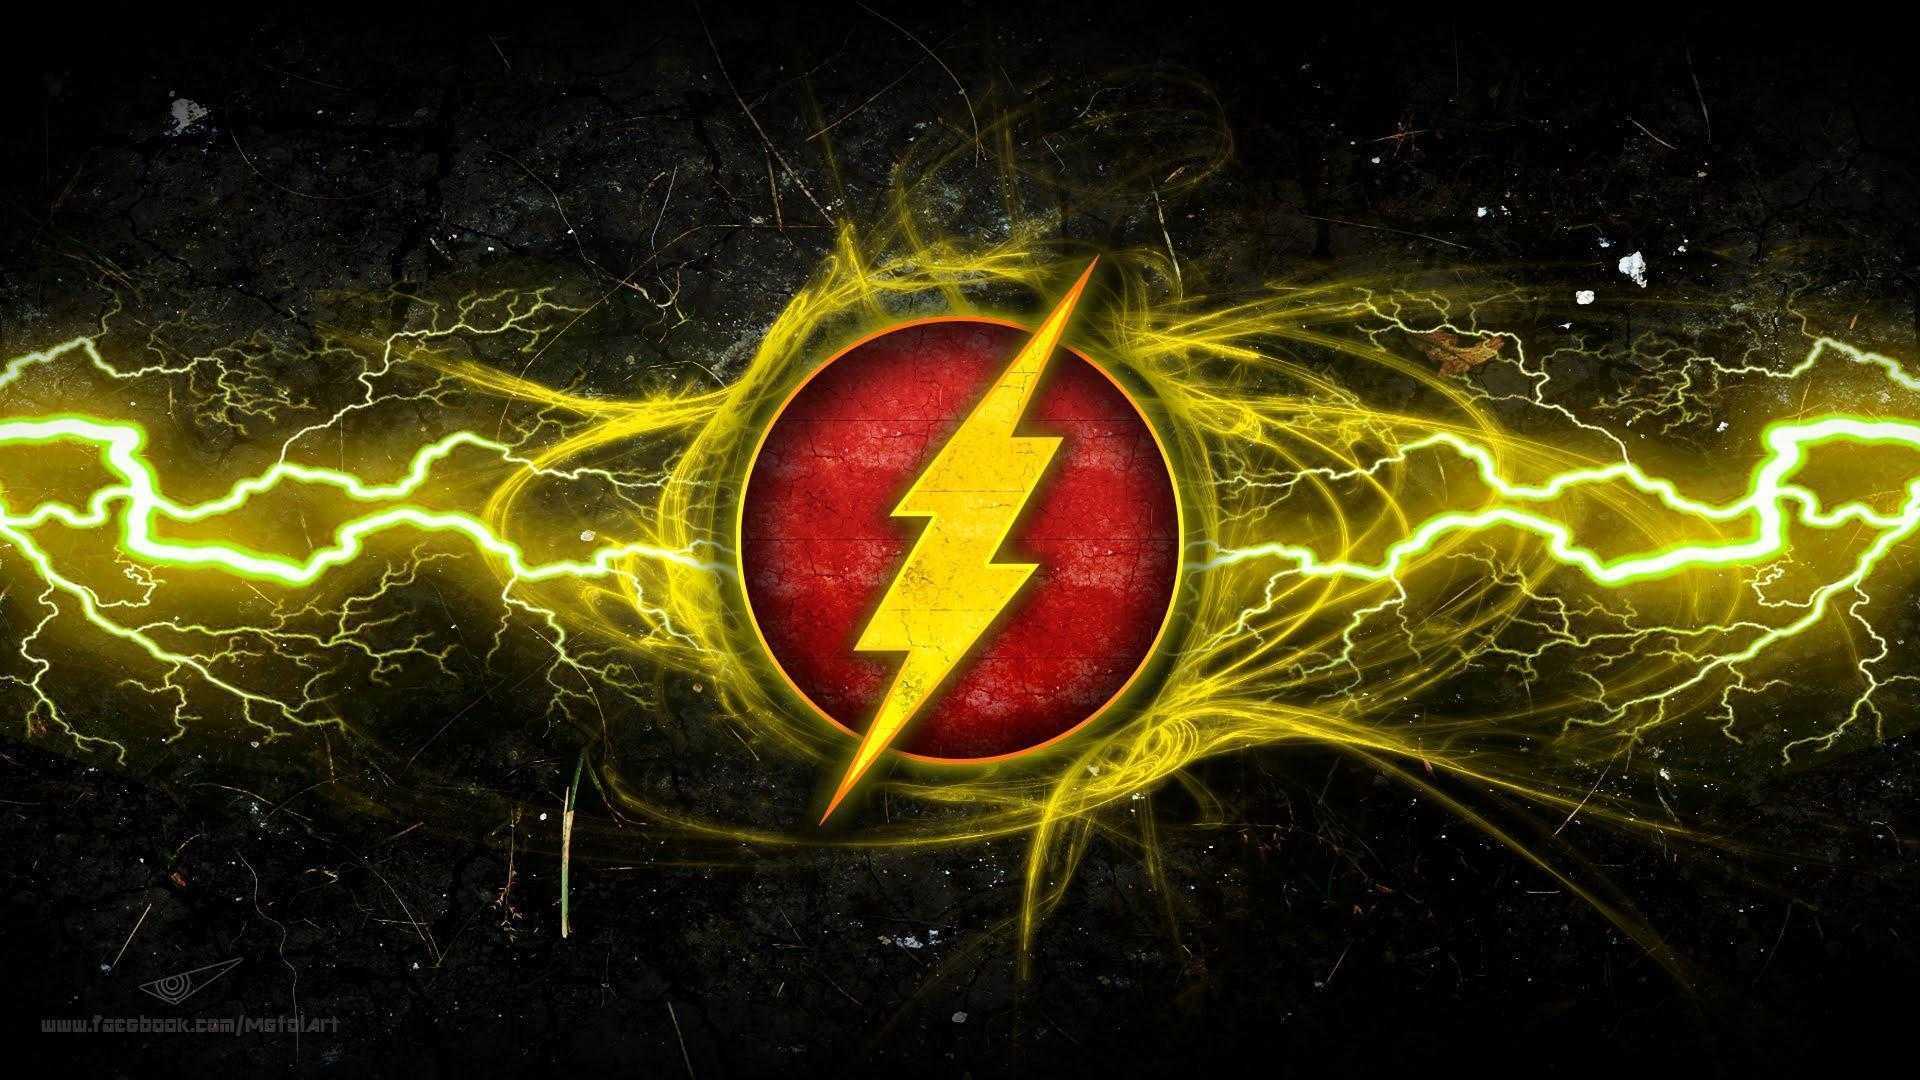 The Flash Logo Wallpaper High Quality Widescreen Background HD